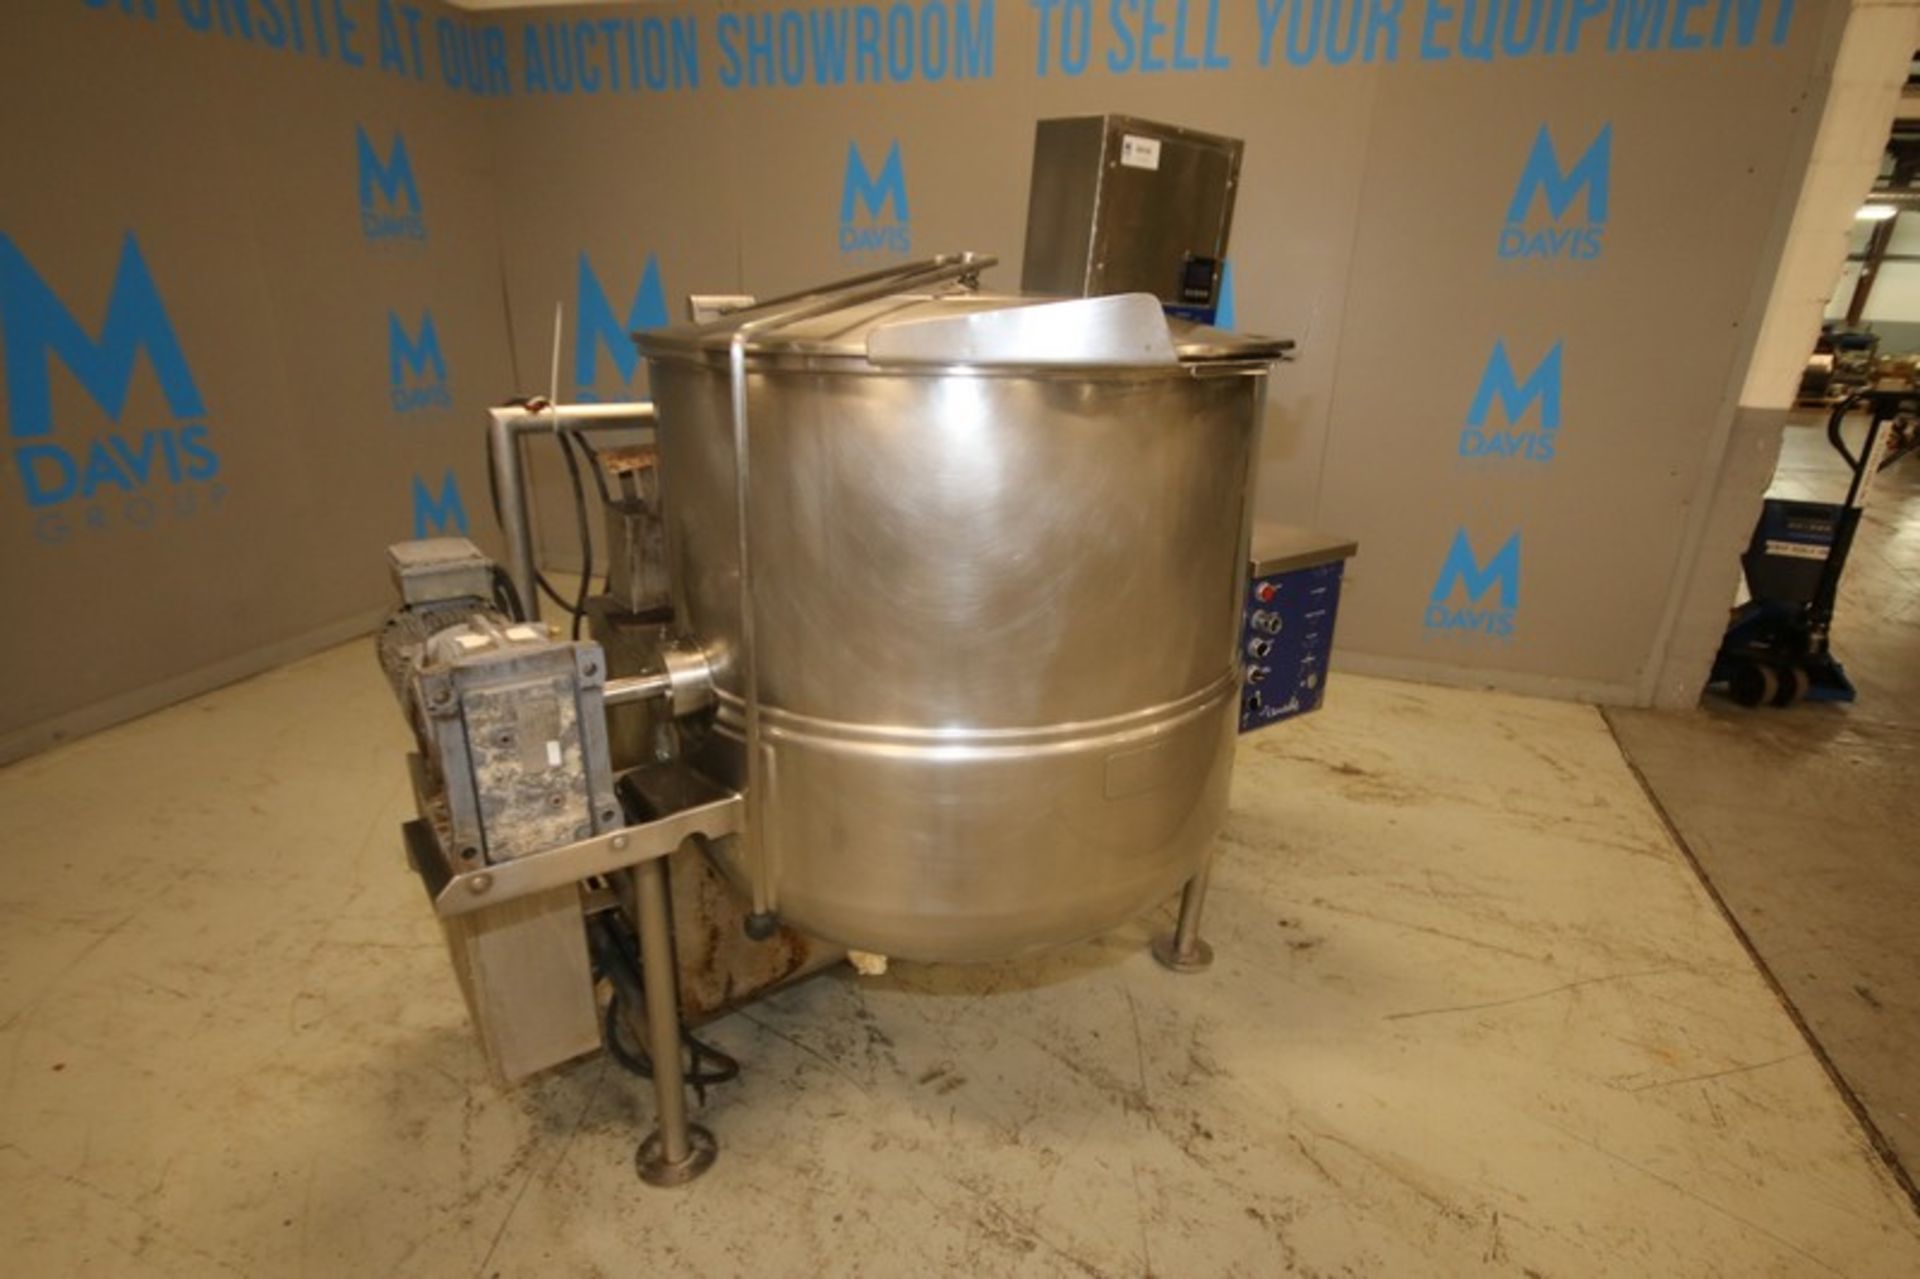 2006 Cleveland 100 Gallon, Jacketed S/S Tilting Kettle, Model HAMKGL100T, SN 3026-06B-01, with - Image 3 of 10